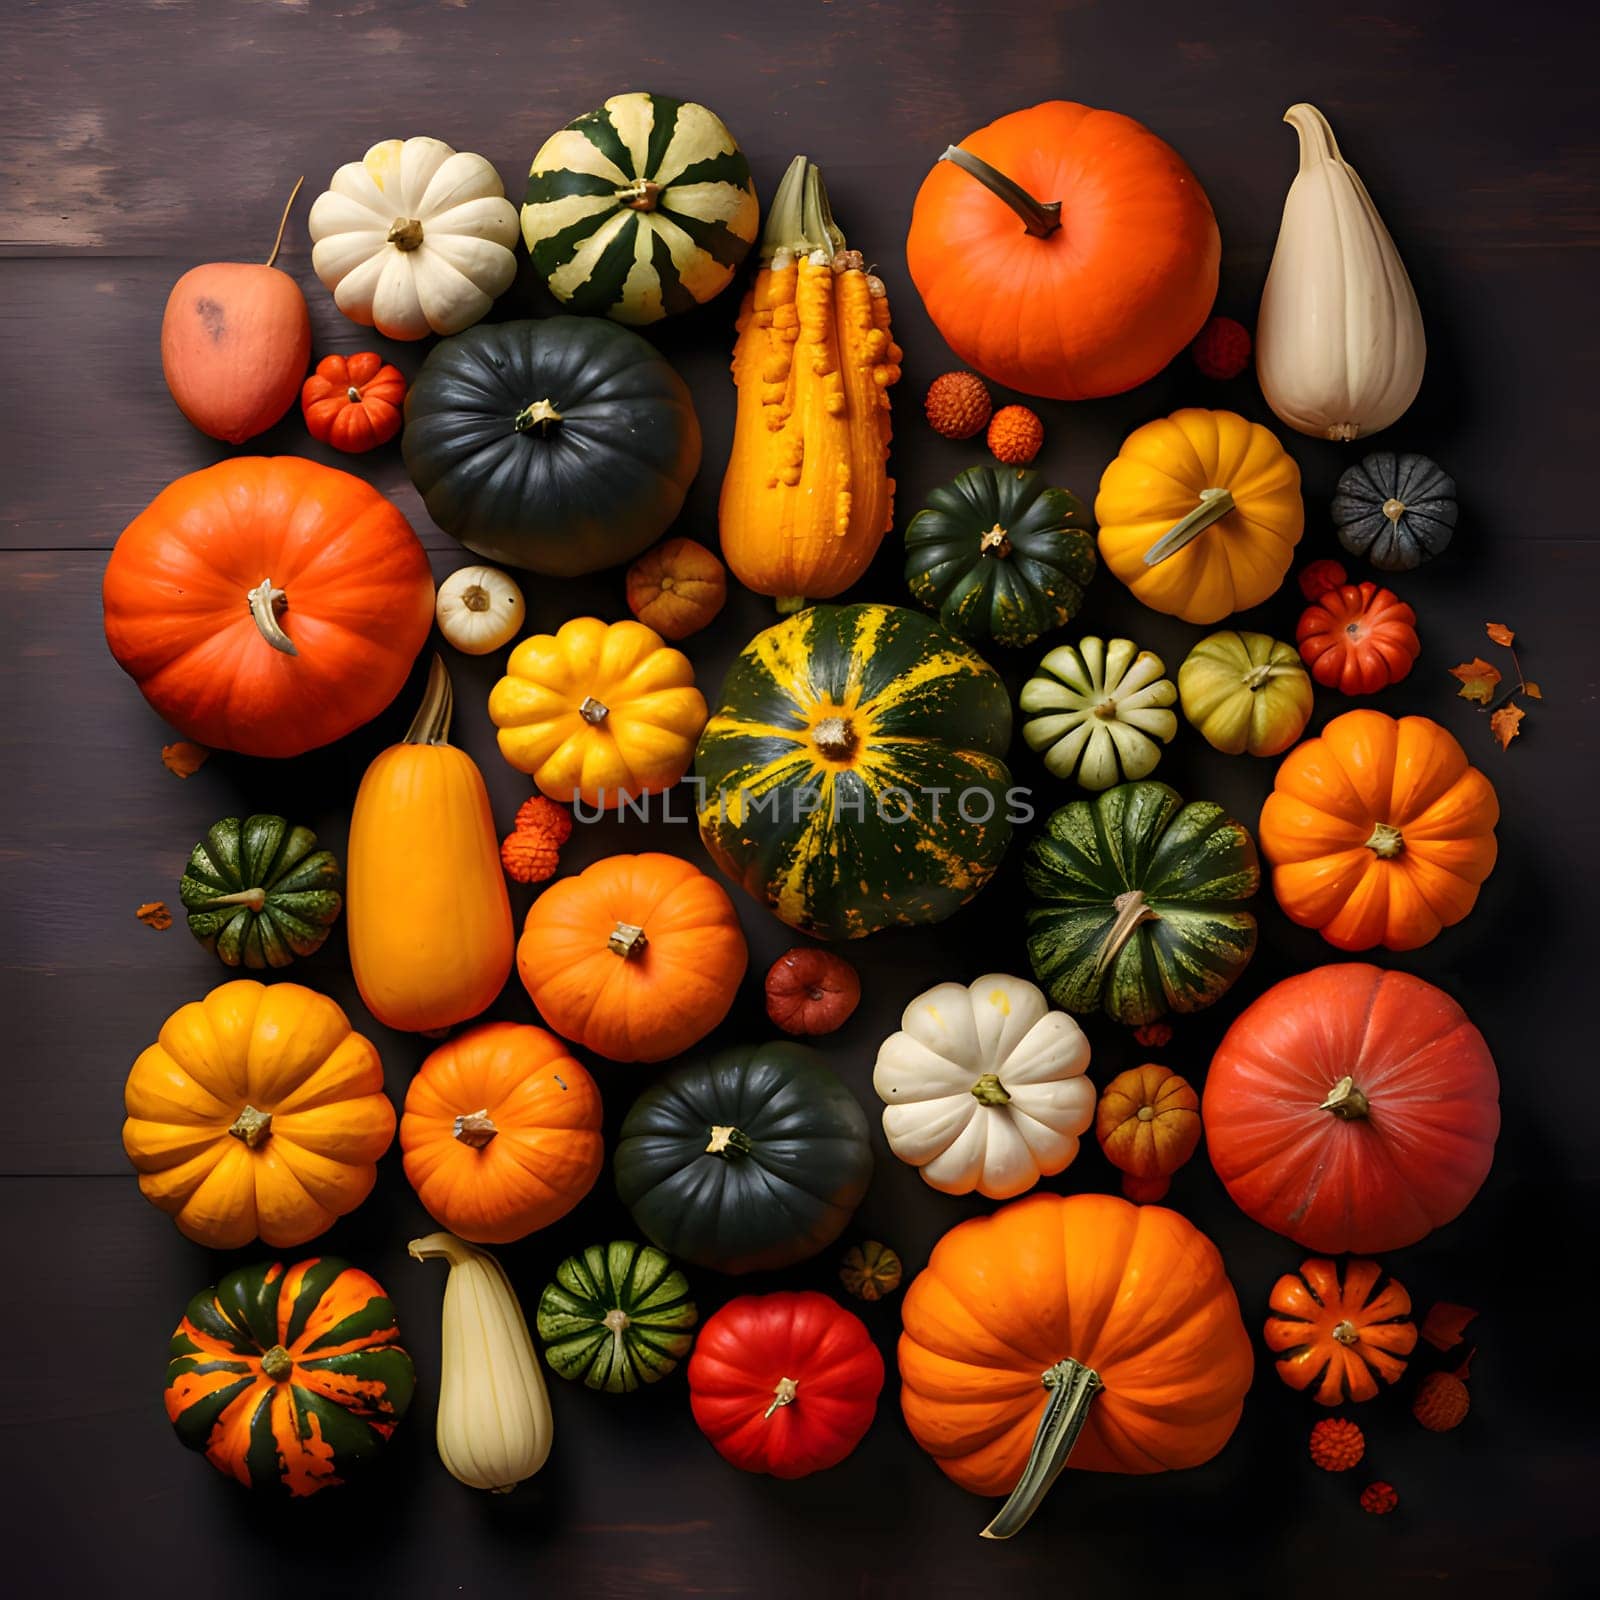 An aerial view of colorful pumpkins, on dark boards. Pumpkin as a dish of thanksgiving for the harvest. An atmosphere of joy and celebration.